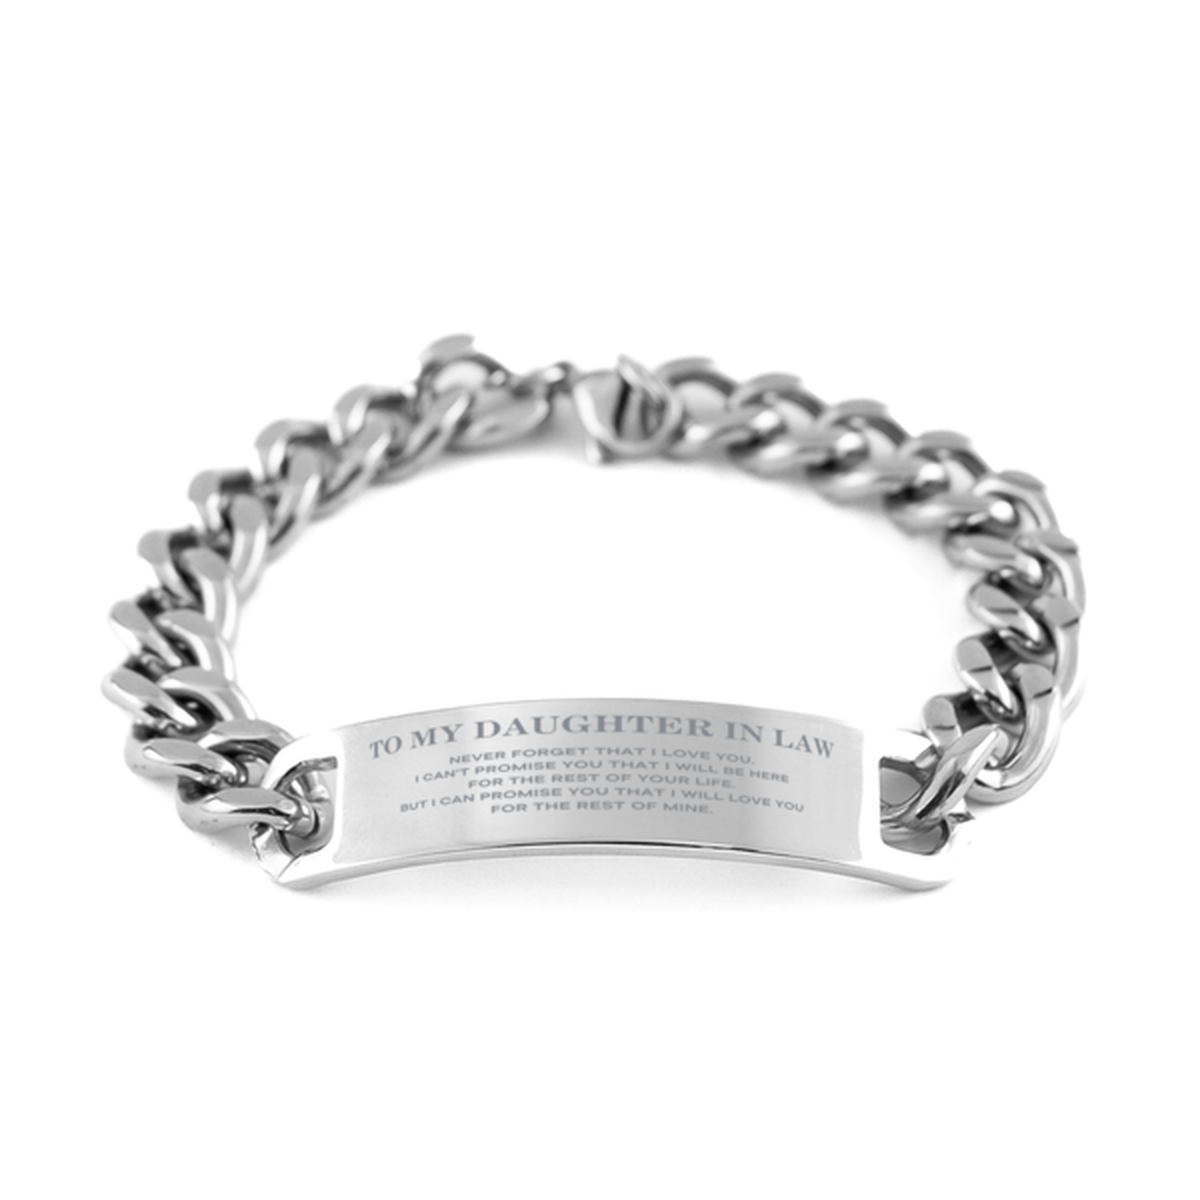 To My Daughter In Law Gifts, I will love you for the rest of mine, Love Daughter In Law Bracelet, Birthday Christmas Unique Cuban Chain Stainless Steel Bracelet For Daughter In Law